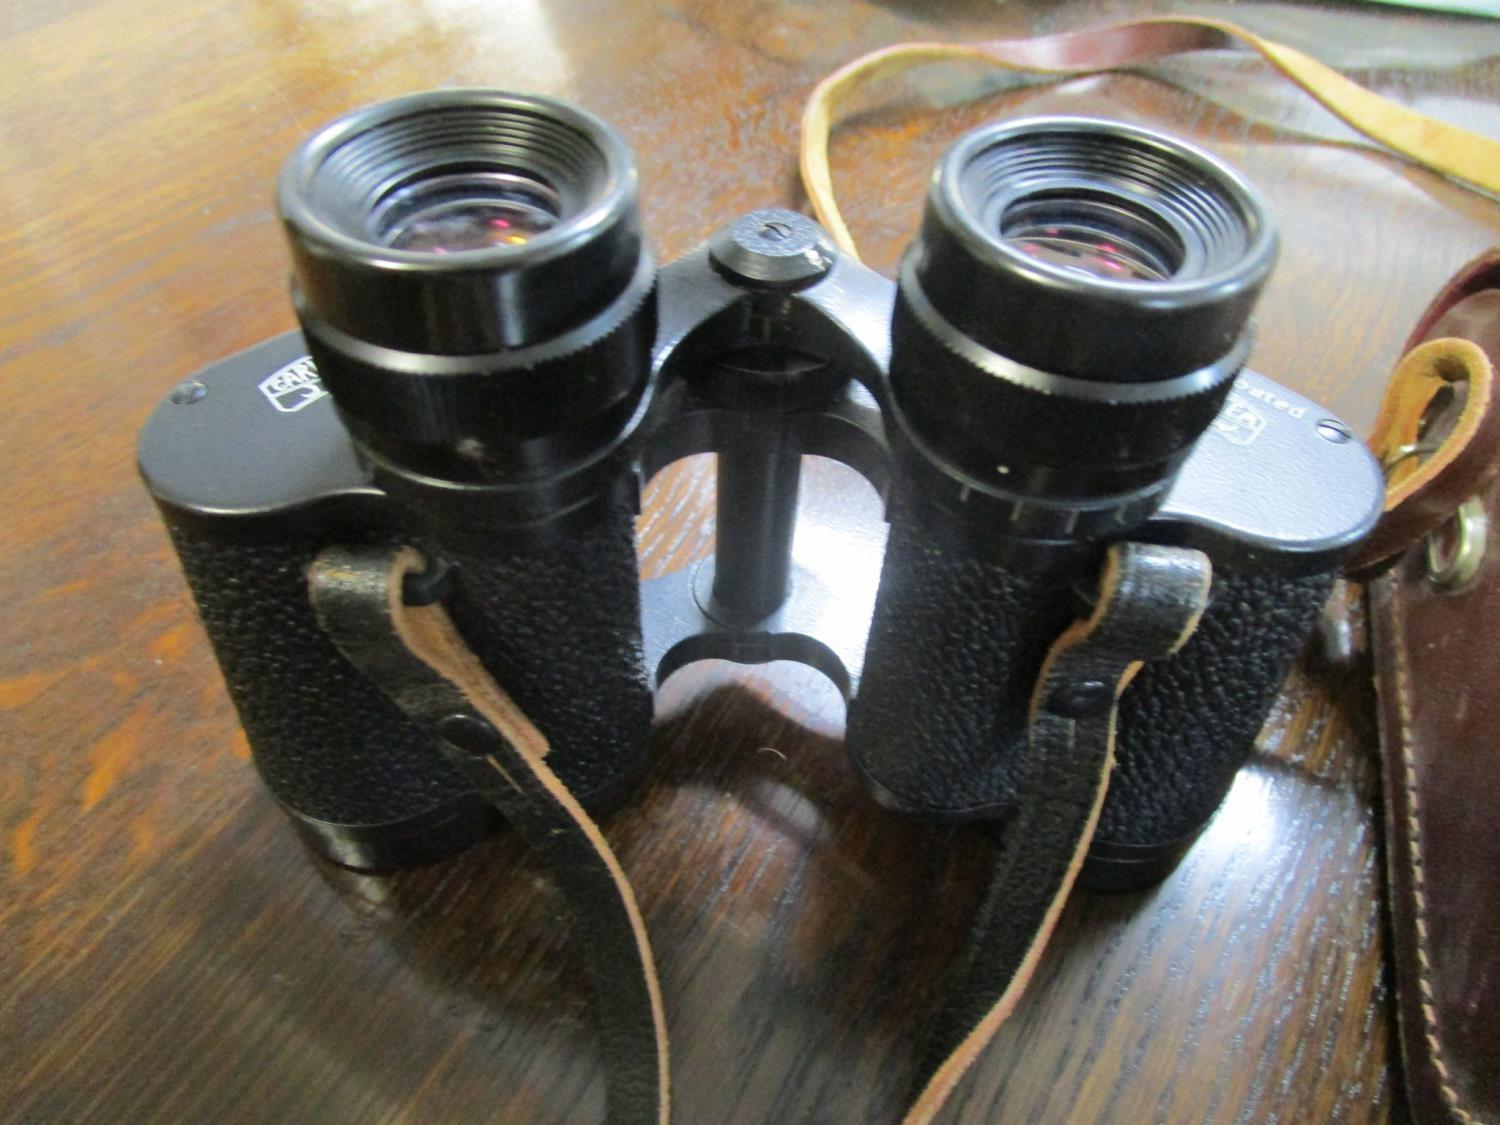 Carl Zeiss Jenoptem leather and cased binoculars 8 x 30w, a cased vanity set and shade for glasses - Image 3 of 4